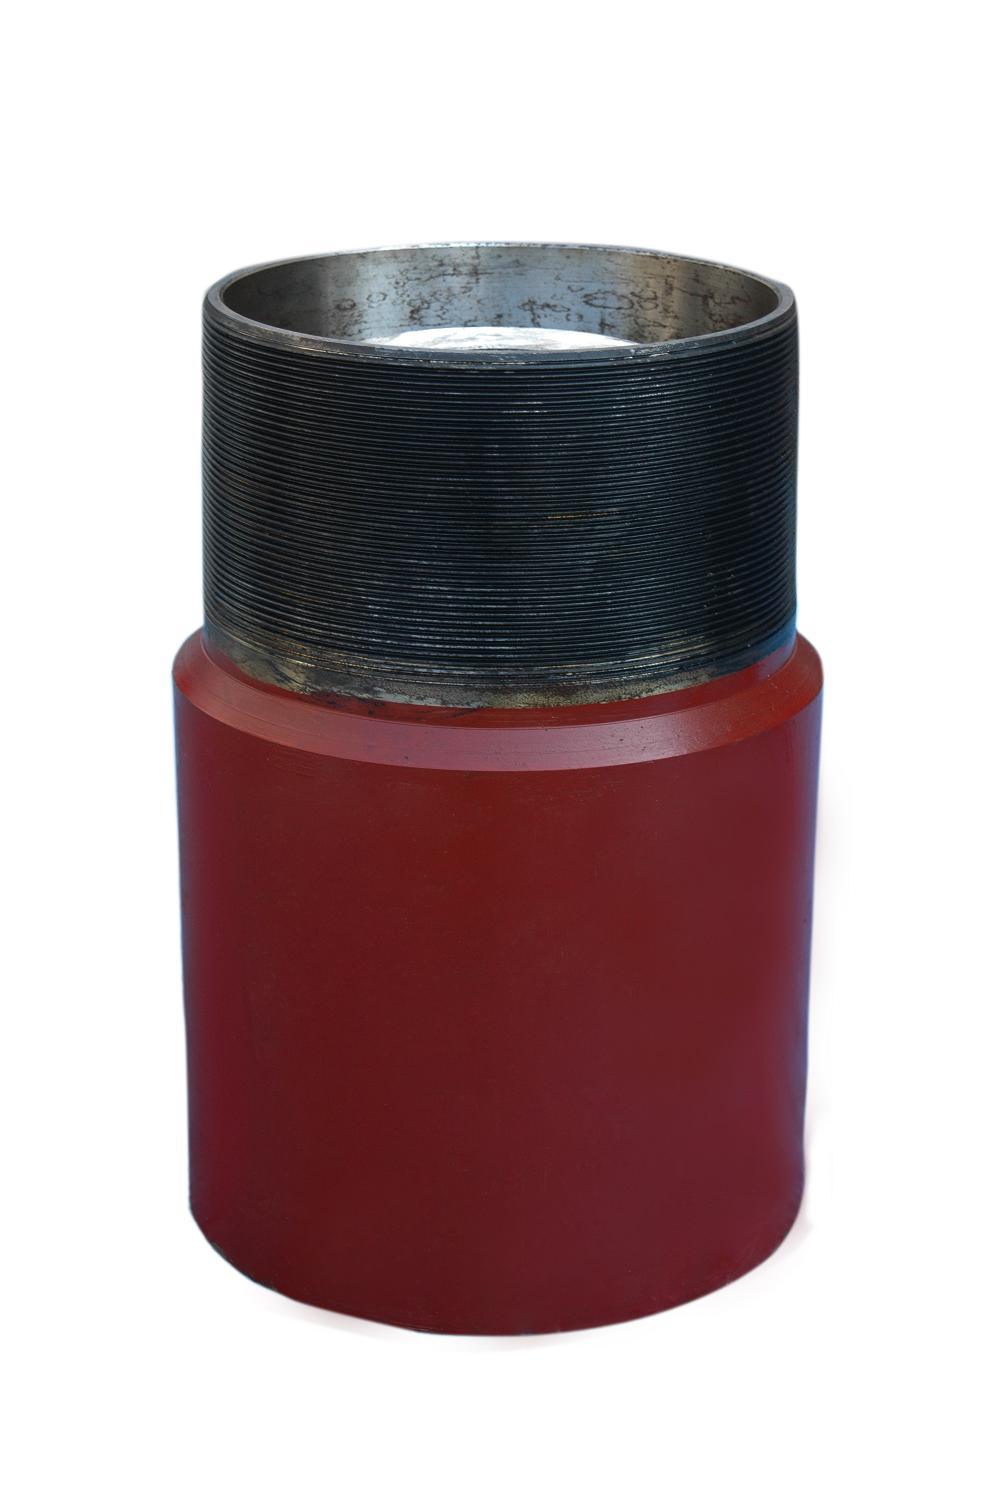 API Standard Cement Type Casing Float Collar for Oilwell